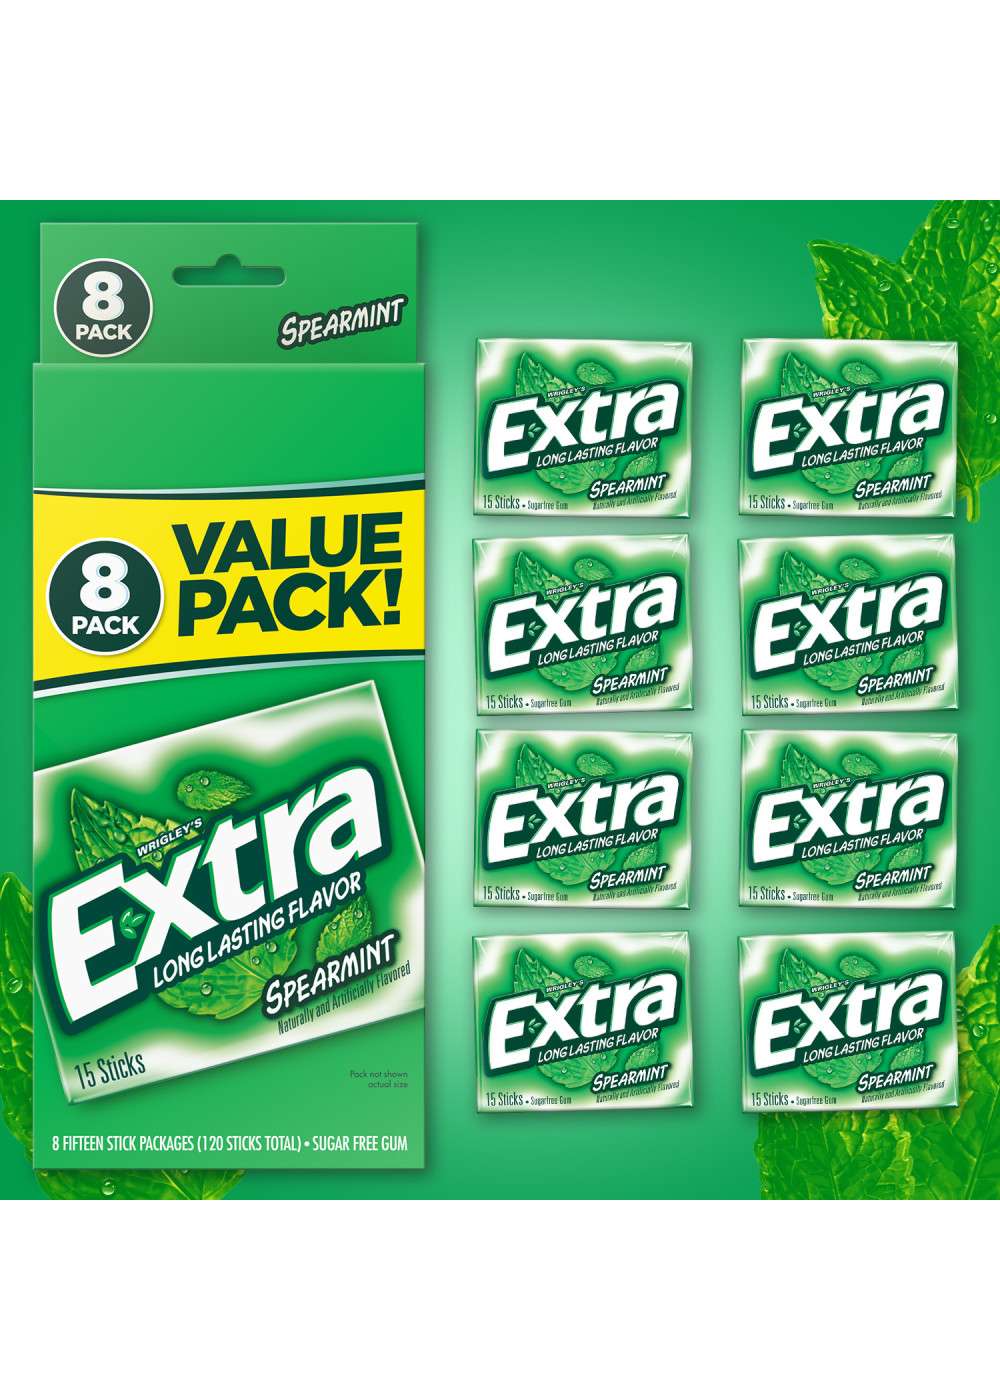 Extra Sugarfree Gum Value Pack - Spearmint, 8 Pk; image 3 of 6